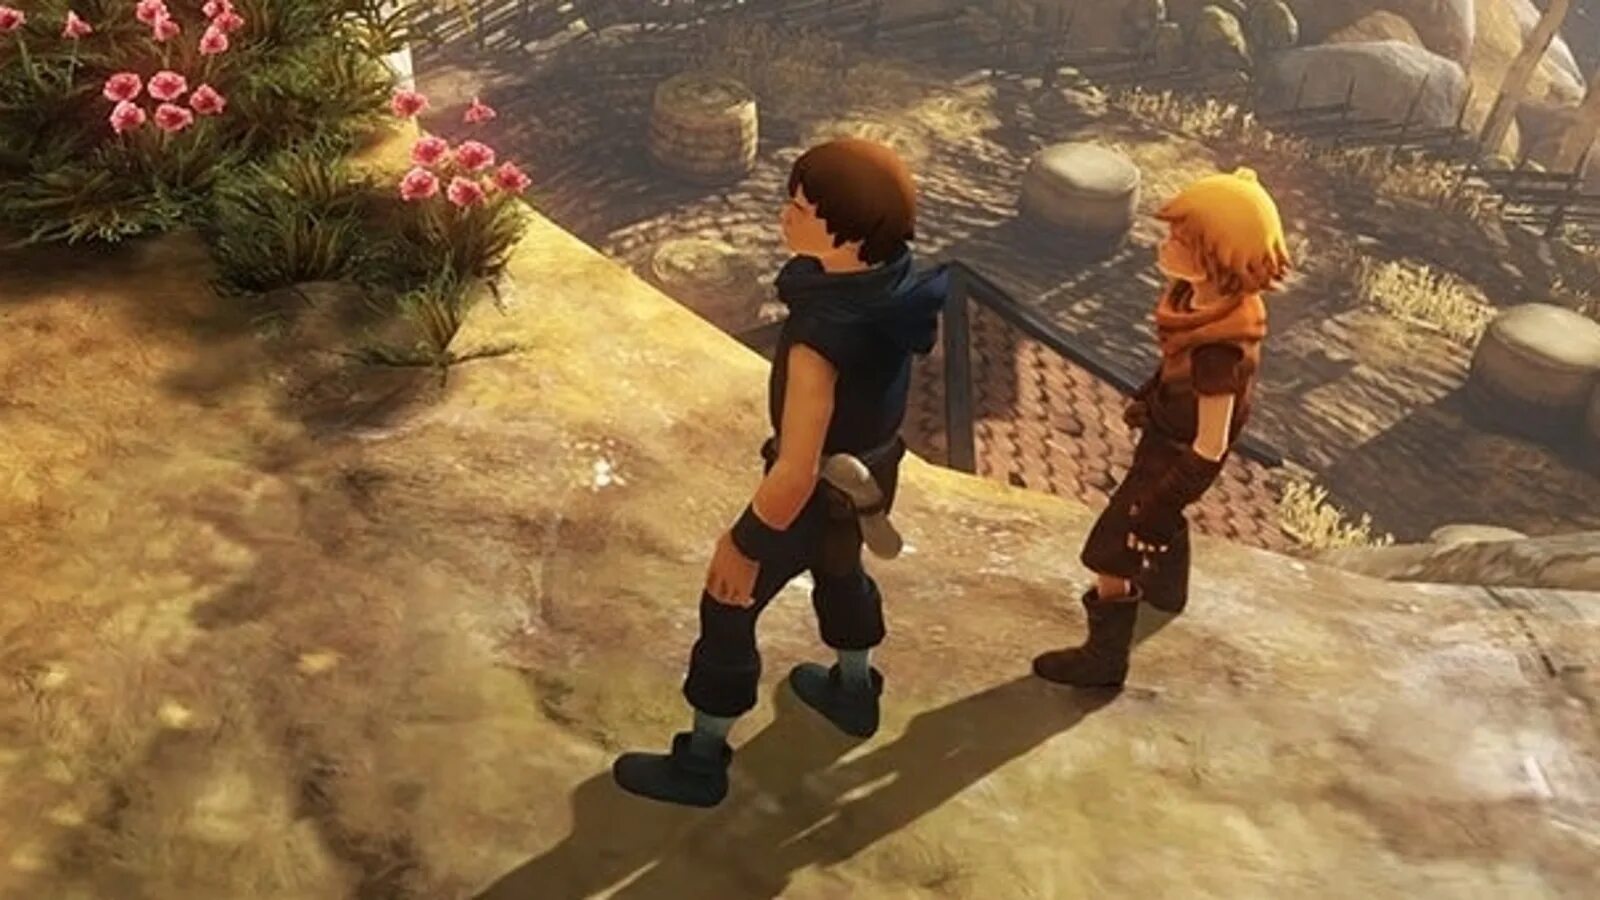 A tale of two sons ps4. Brothers a Tale of two sons ps4. Brothers a Tale of two sons ps3. Brothers a Tale of two sons системные требования. Brothers: a Tale of two sons Грифон.